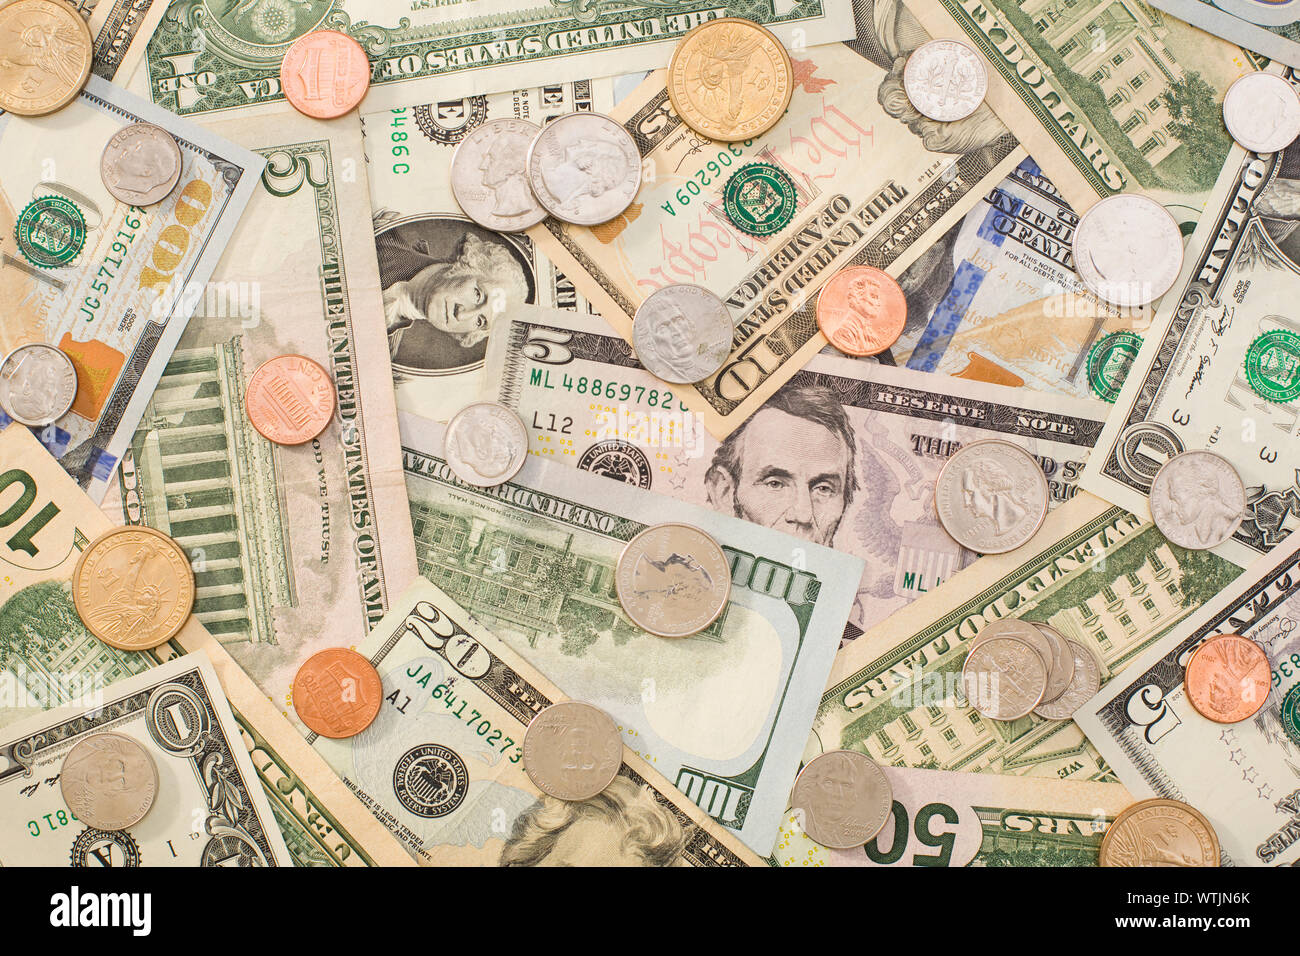 US paper currency and coins Stock Photo